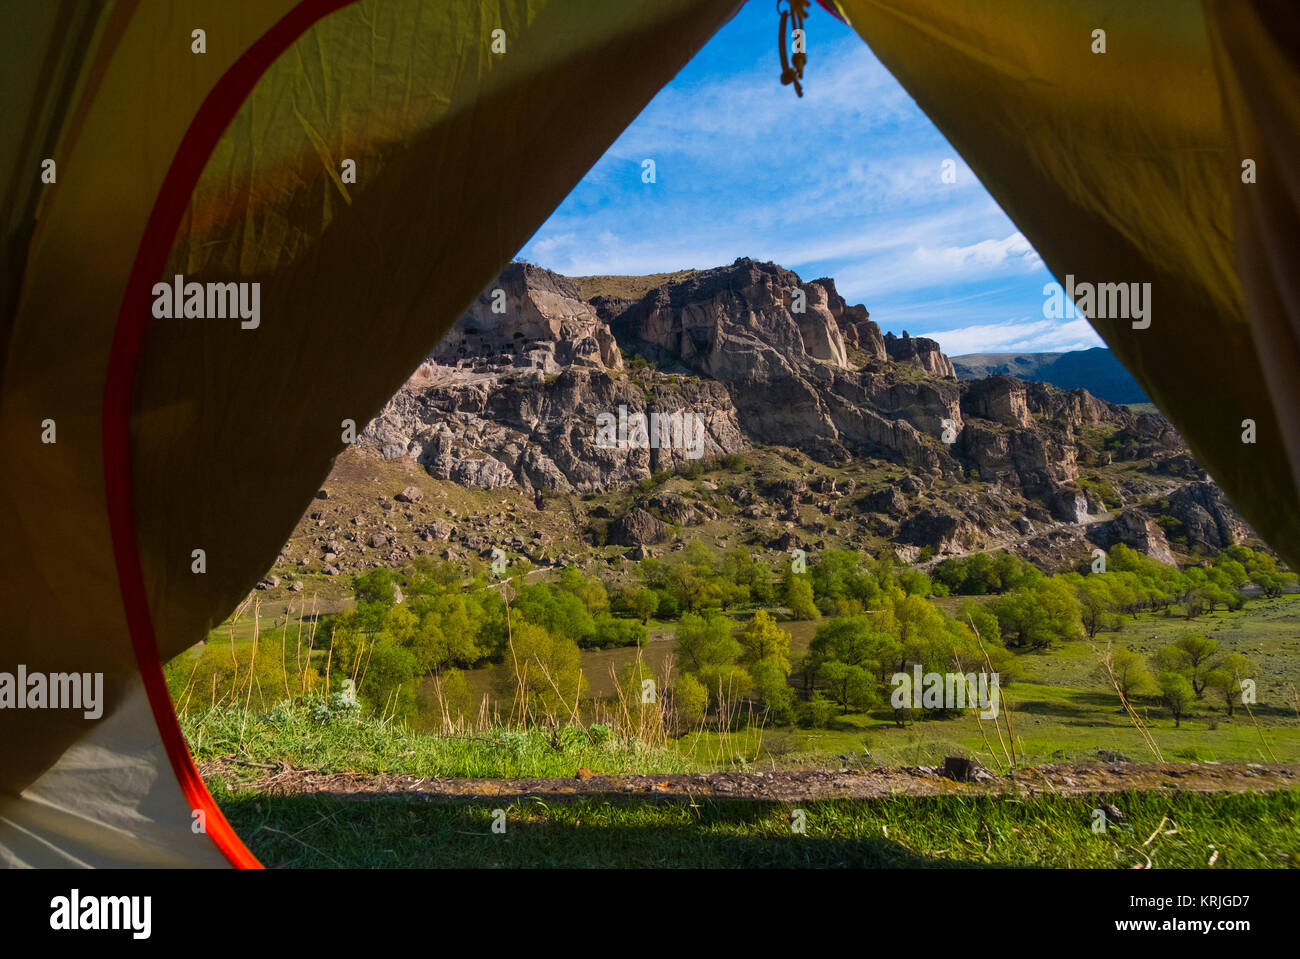 Scenic view of mountain from inside tent Stock Photo